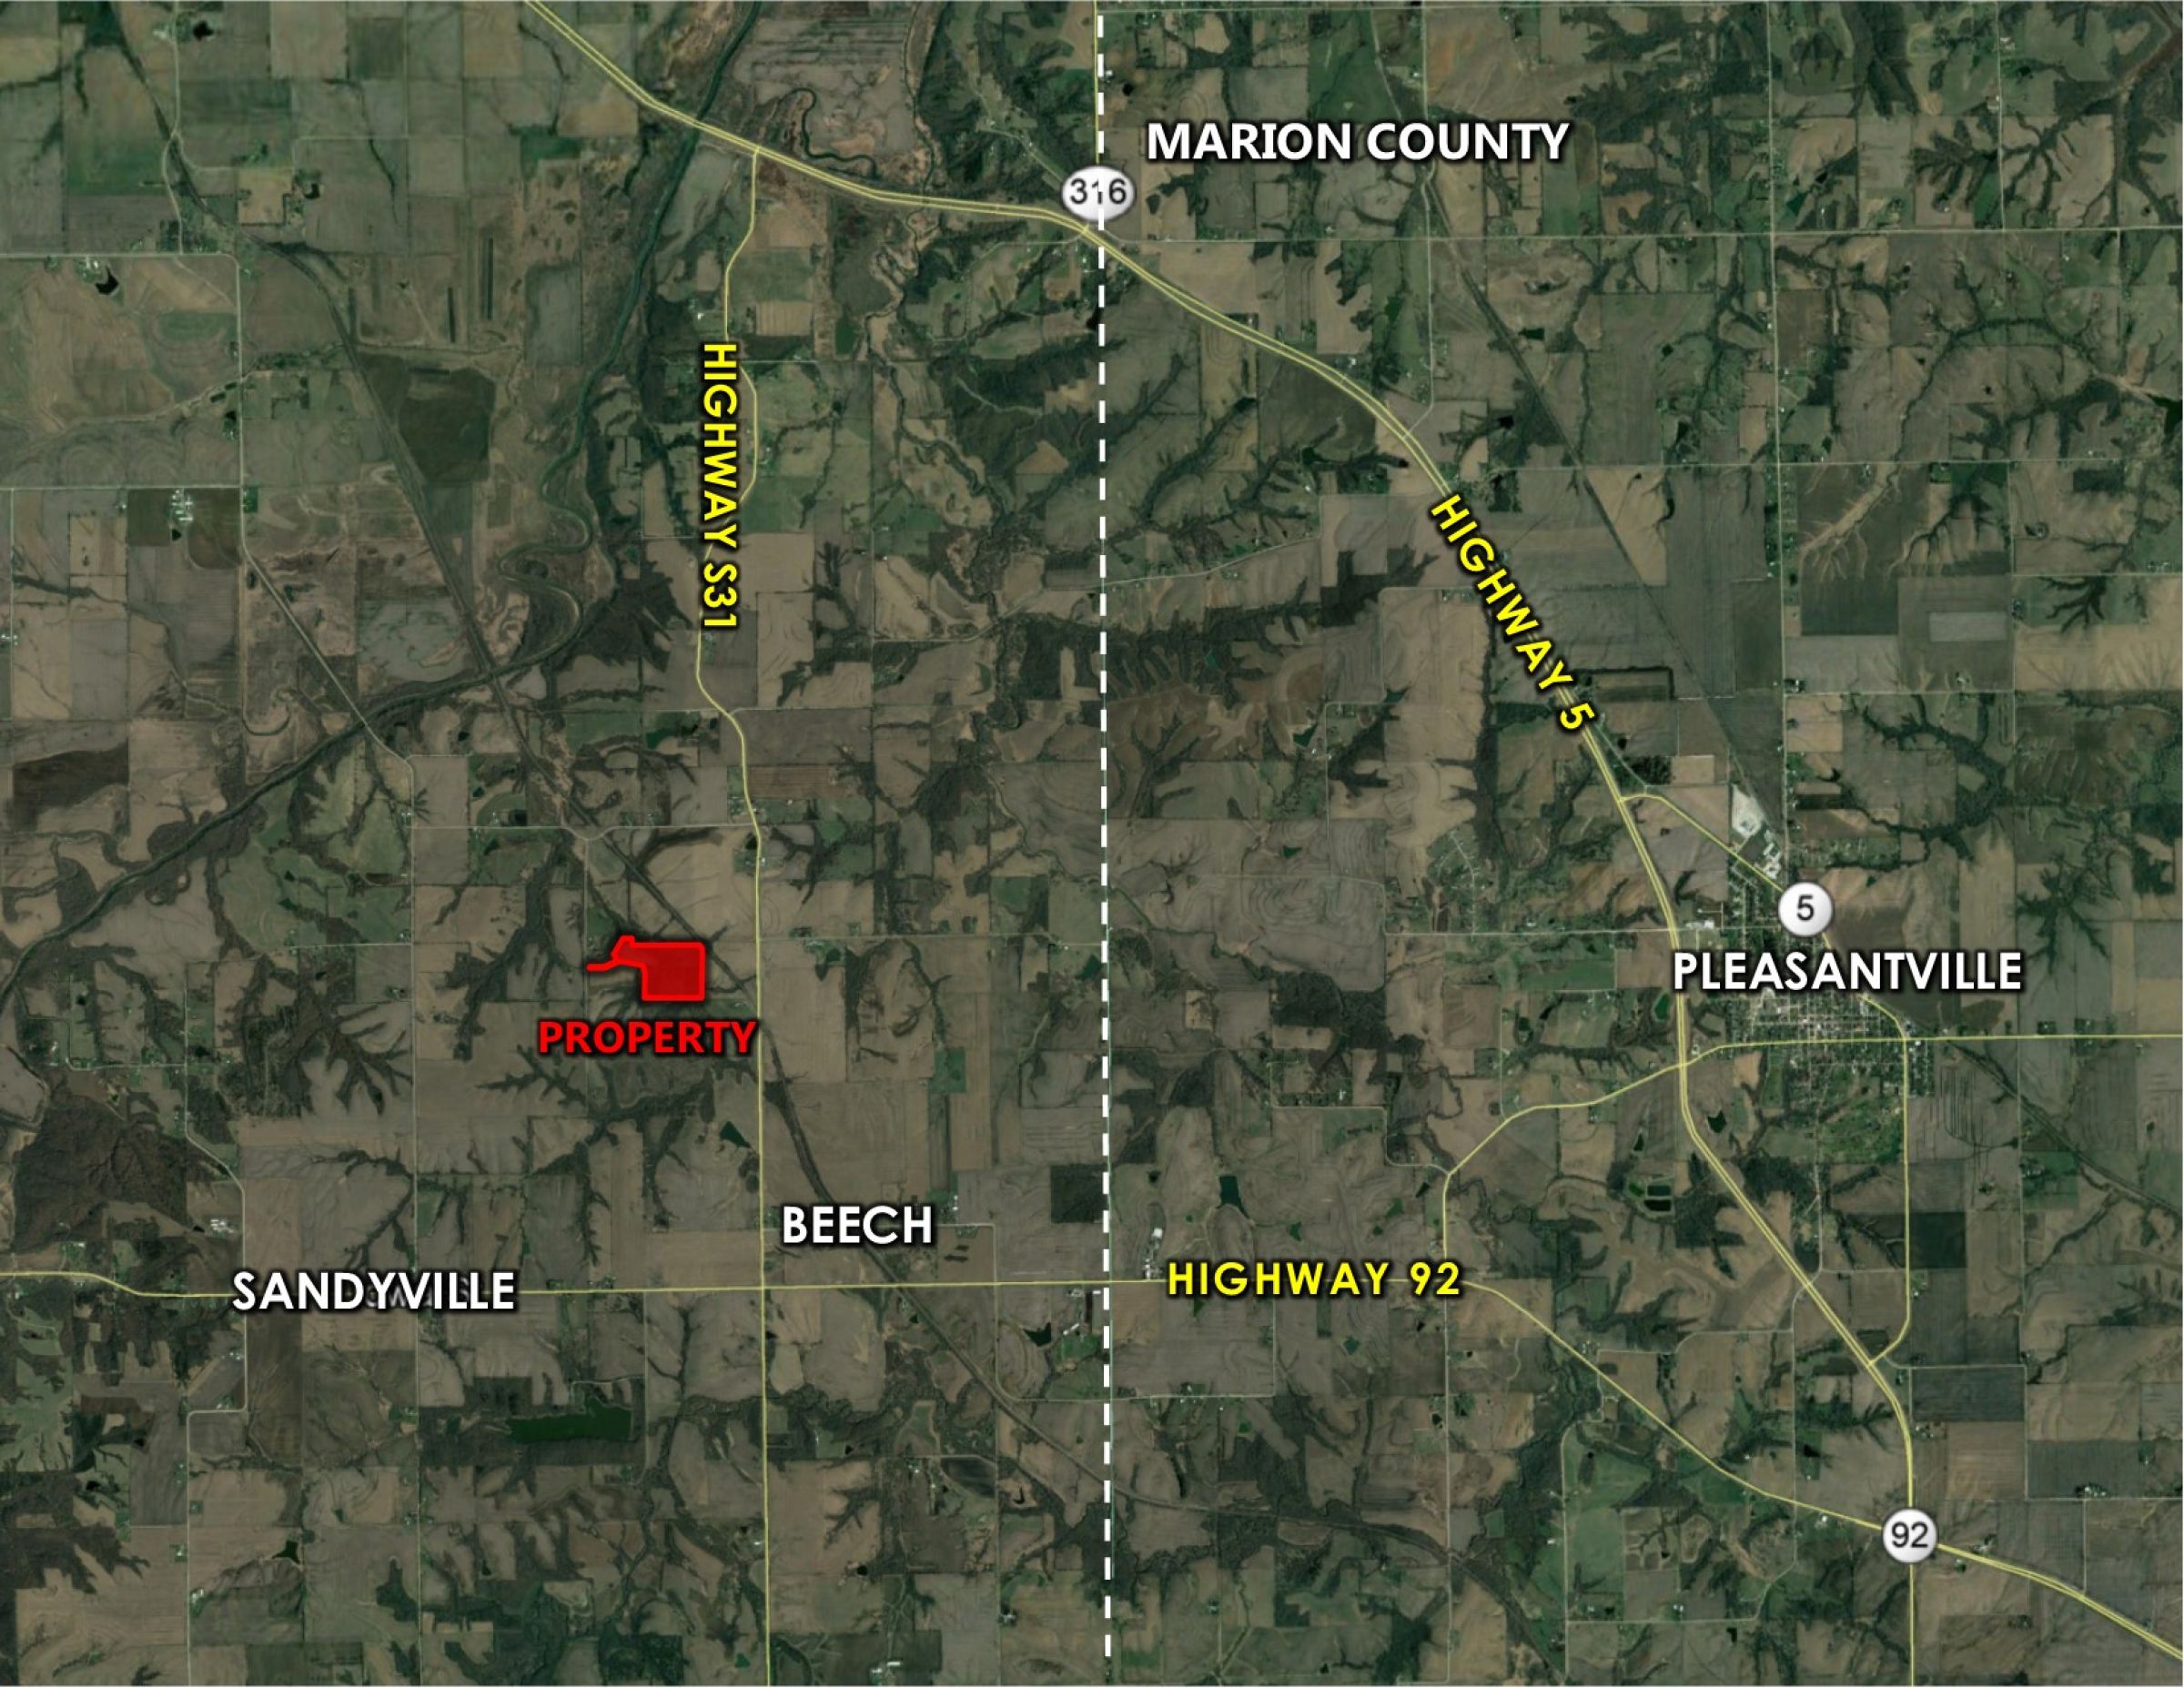 Peoples Company Land For Sale - Warren County Iowa - #14443 - 9109-228th-avenue-ackworth-50001